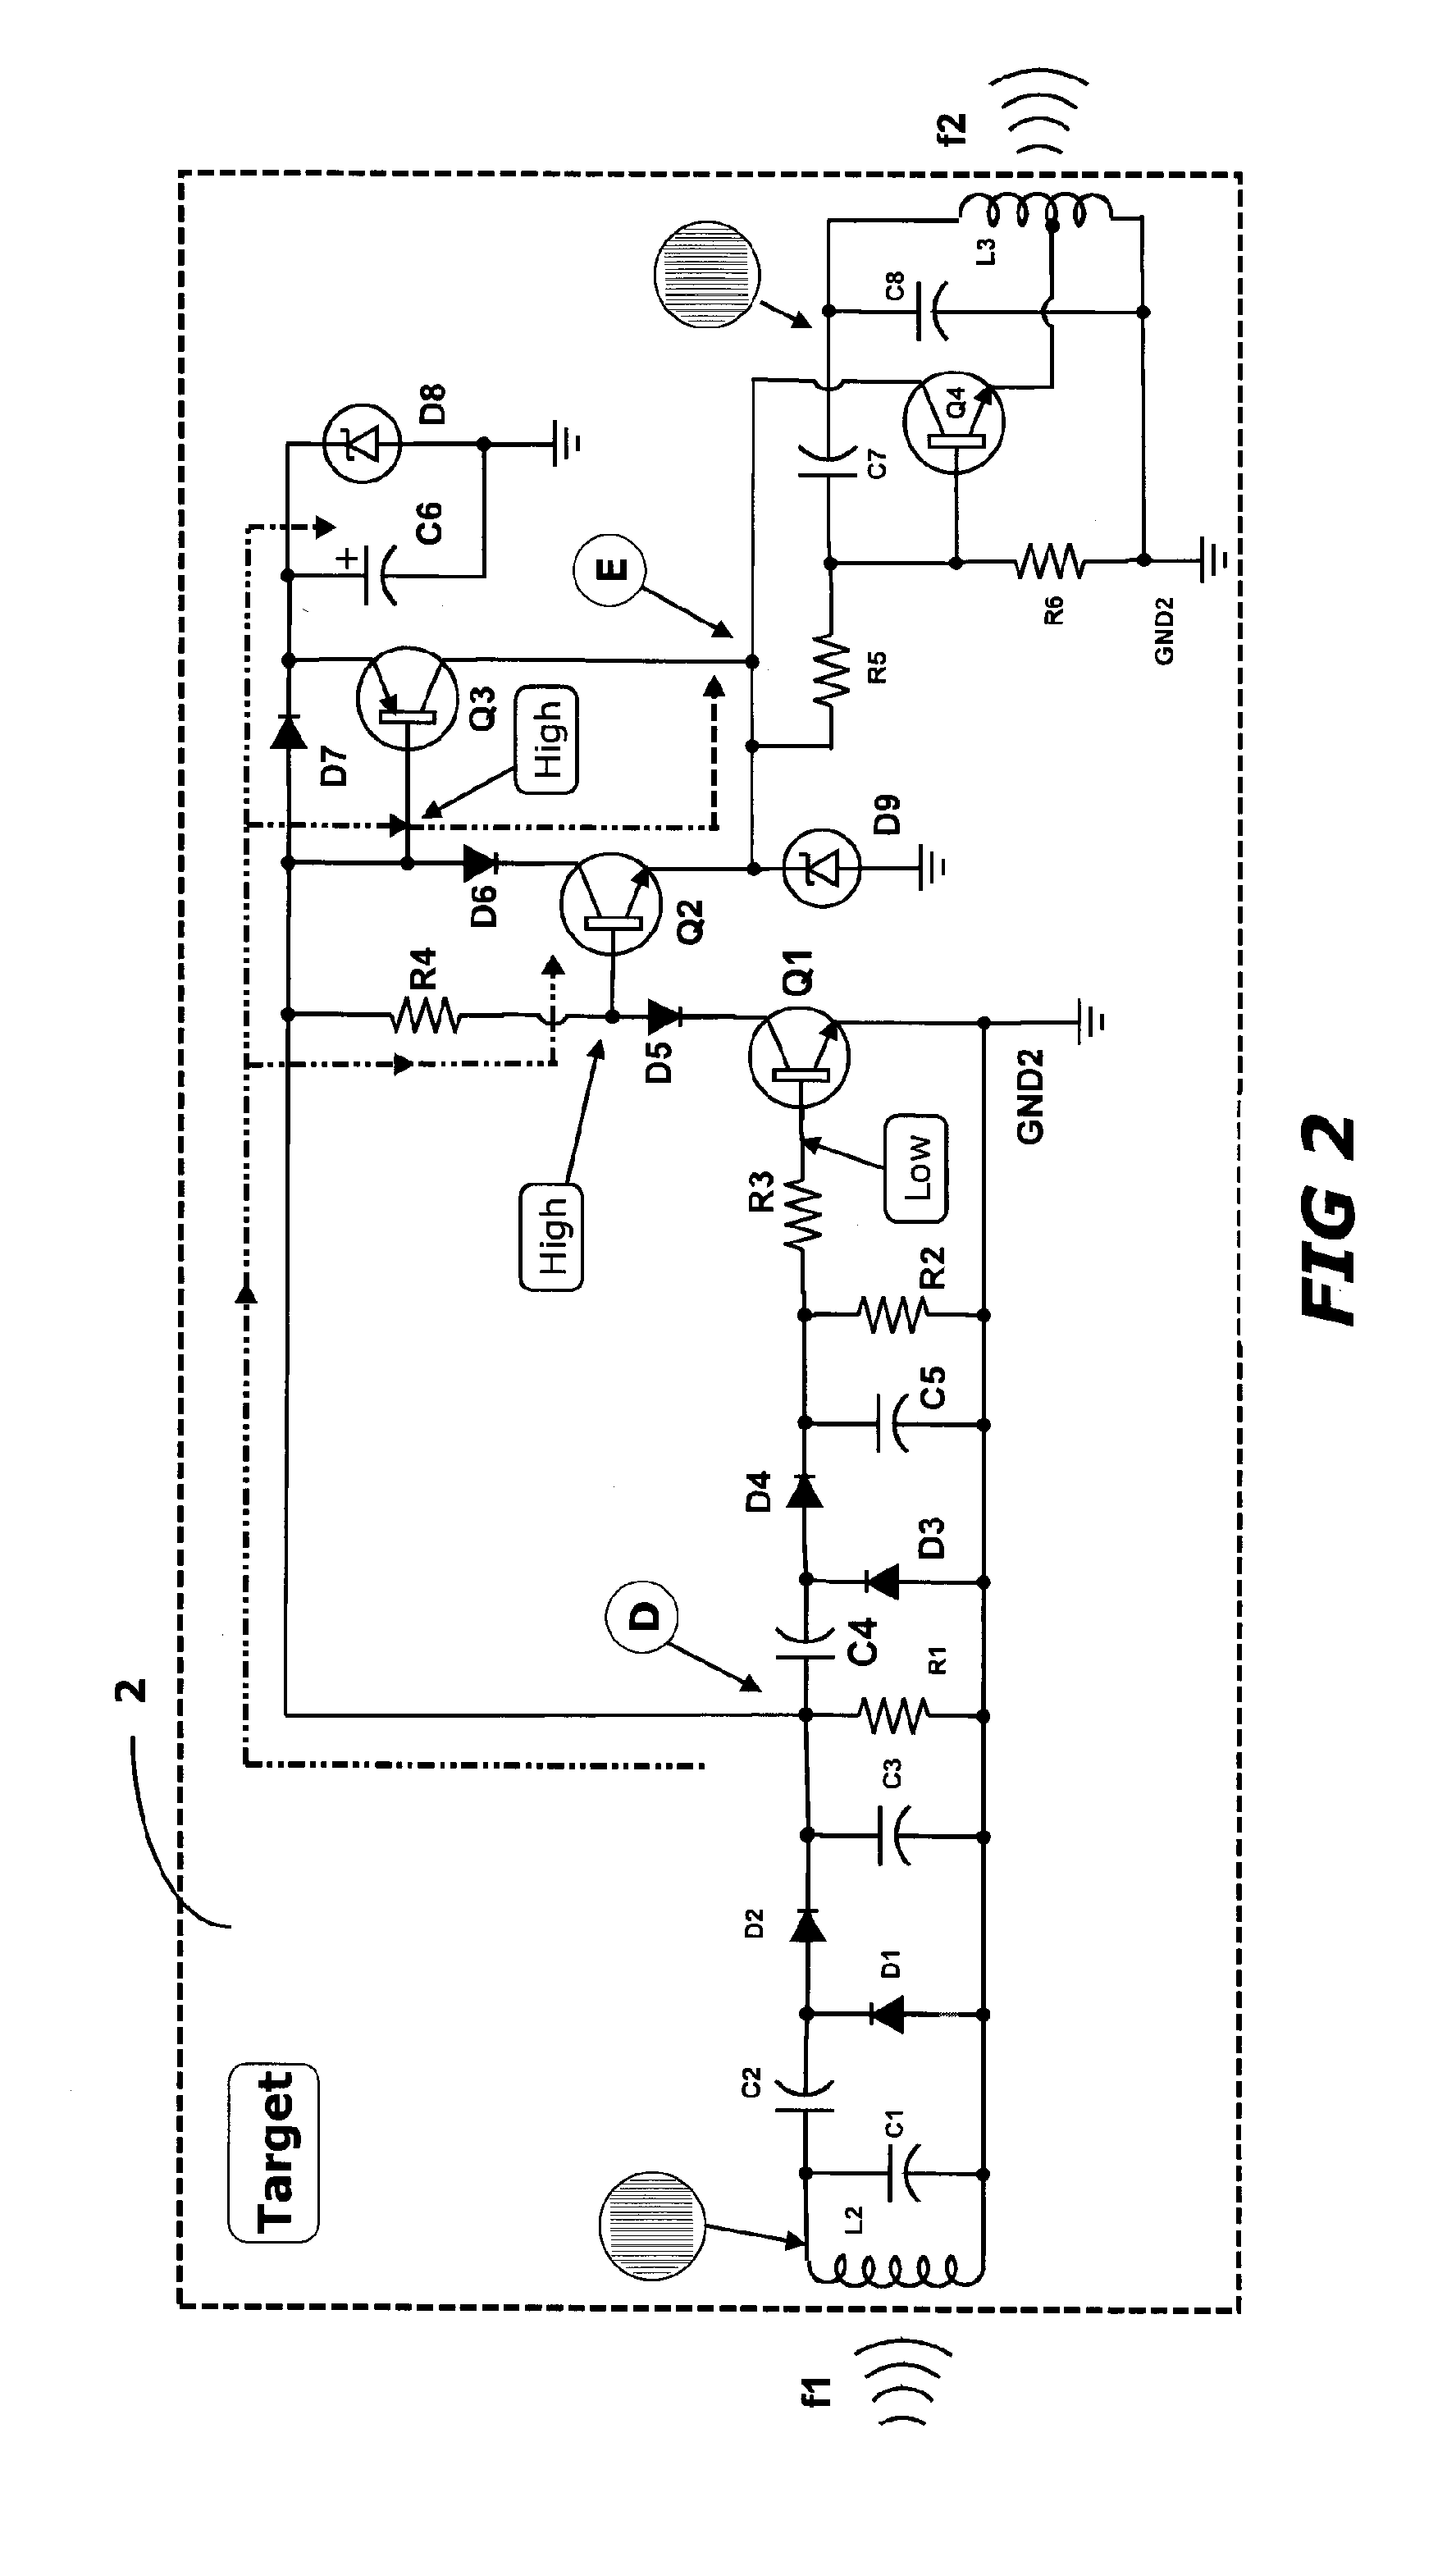 Wireless proximity switch with a target device comprising an inverter